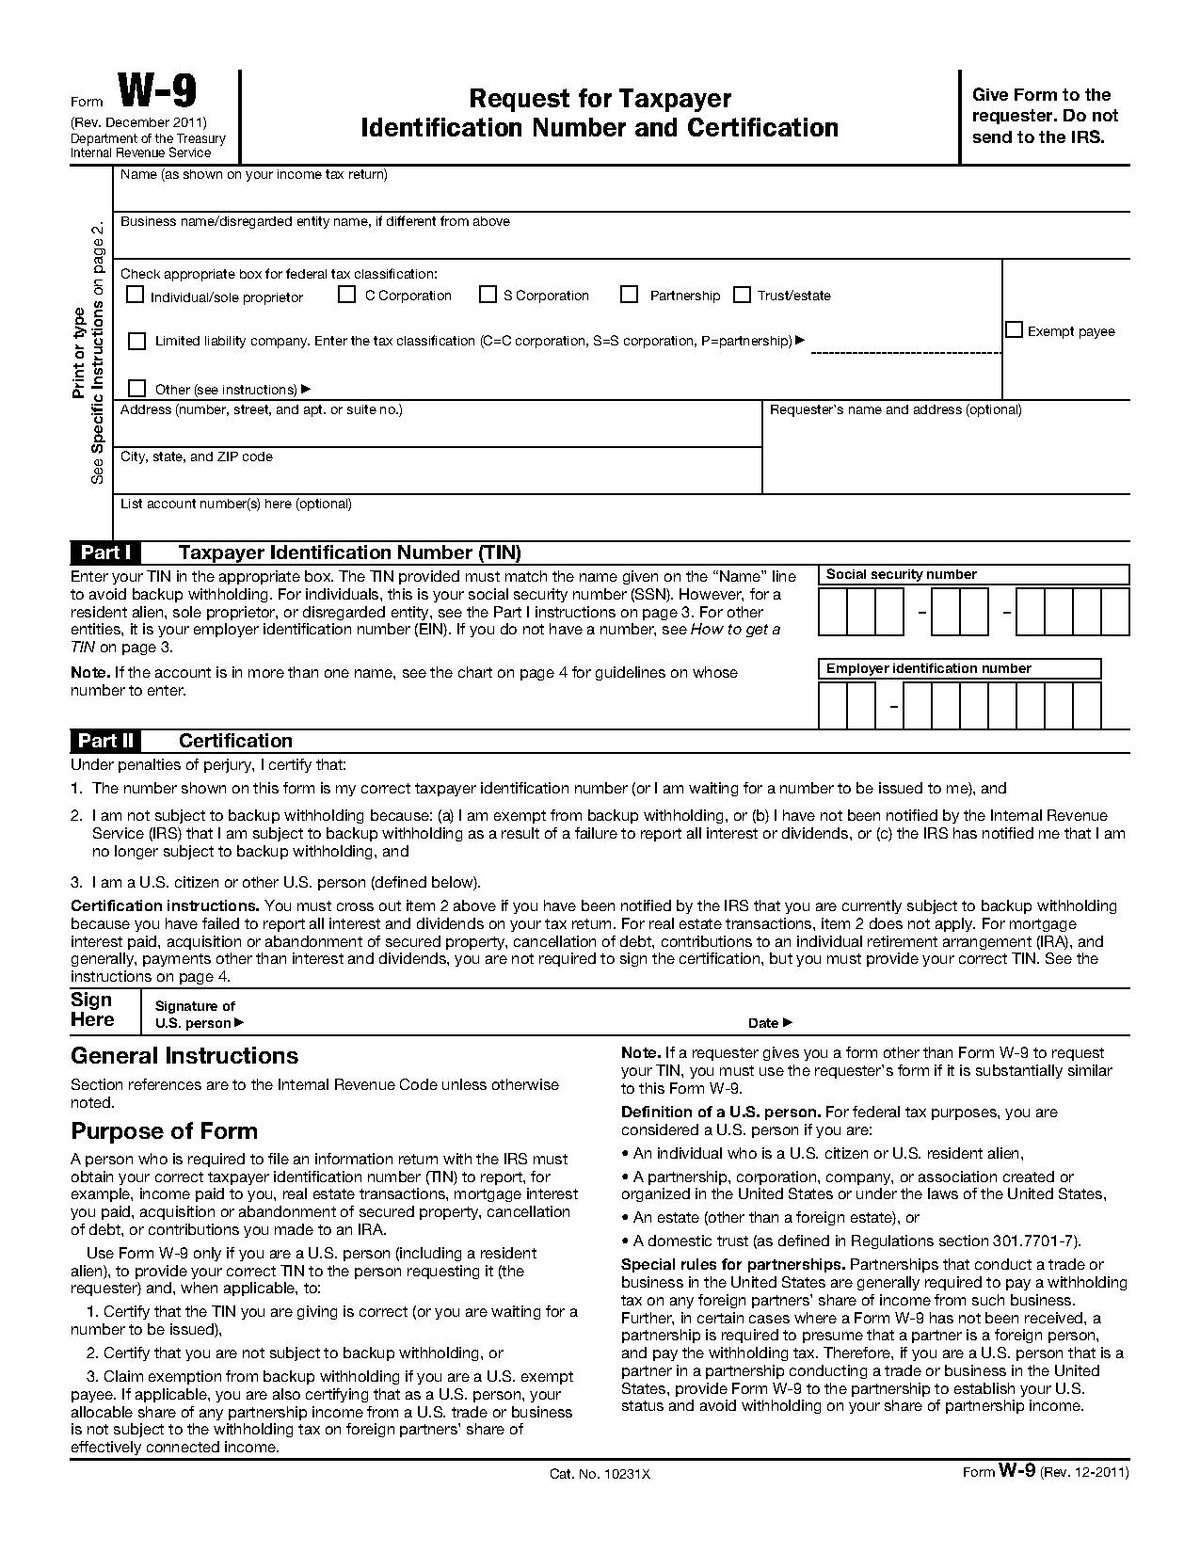 Form W-9 - Wikipedia-Looking For A Blank W-9 Form